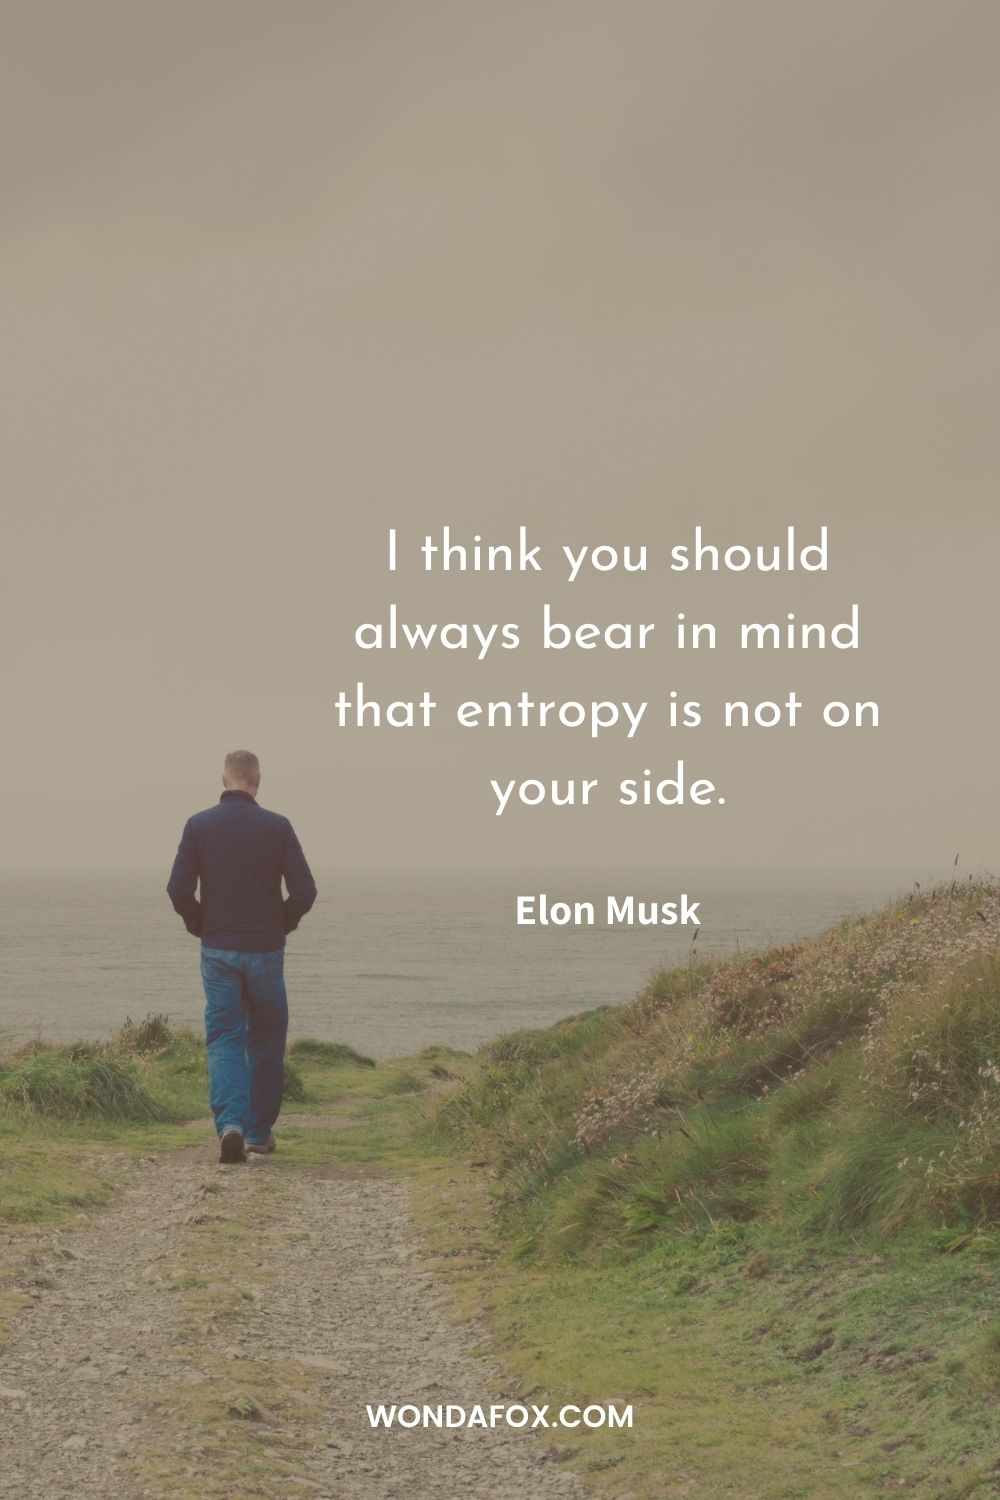 I think you should always bear in mind that entropy is not on your side.